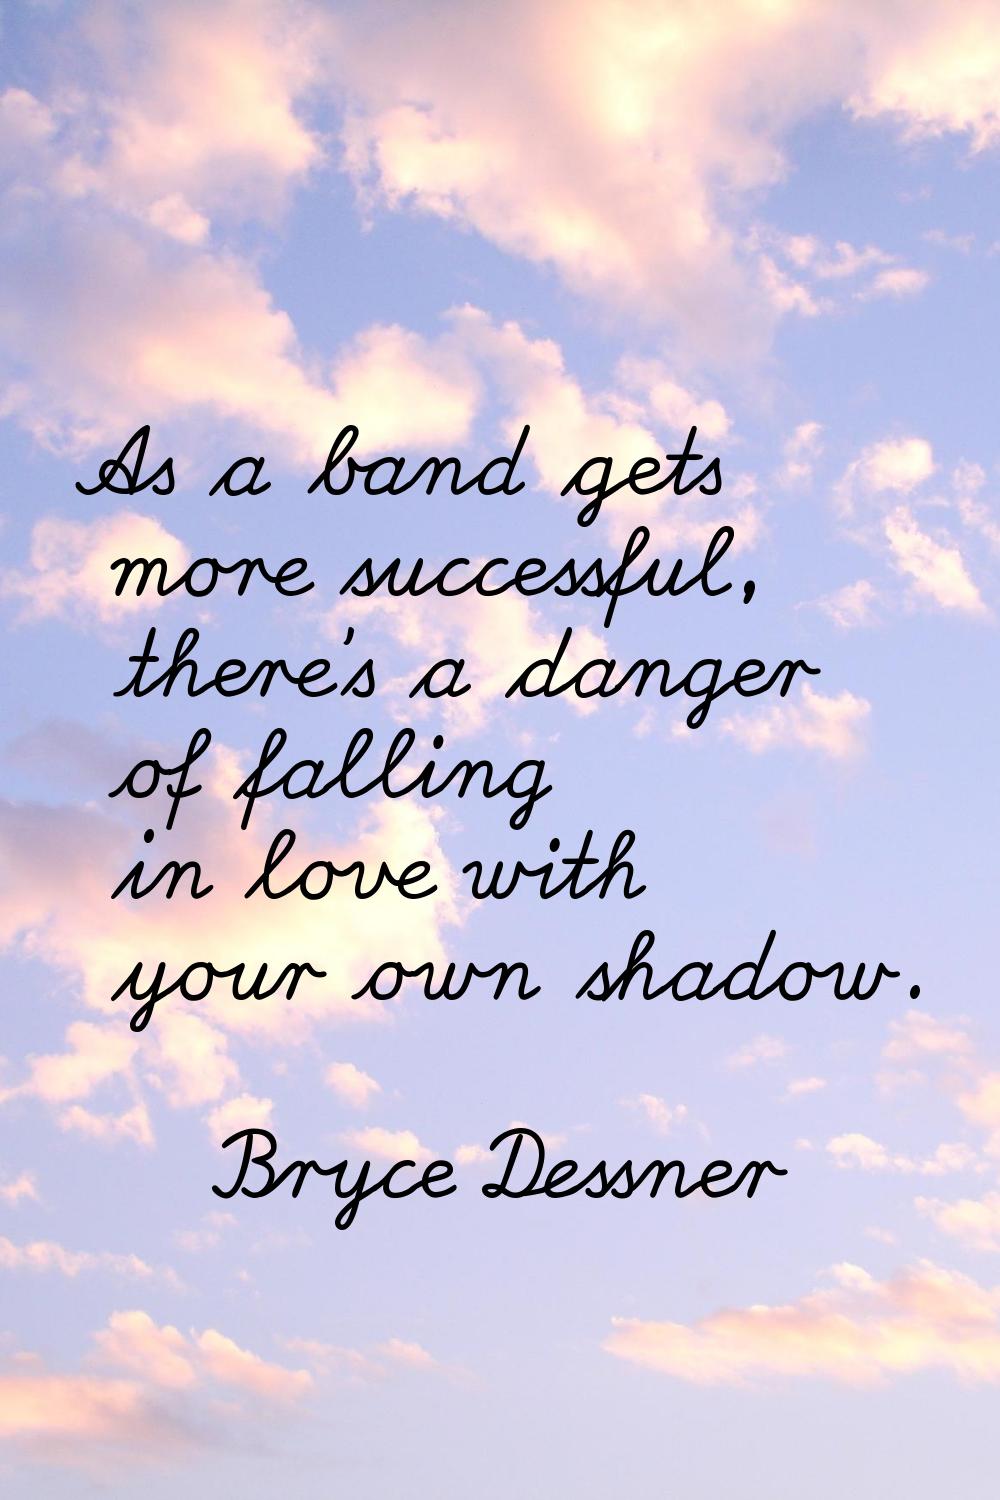 As a band gets more successful, there's a danger of falling in love with your own shadow.